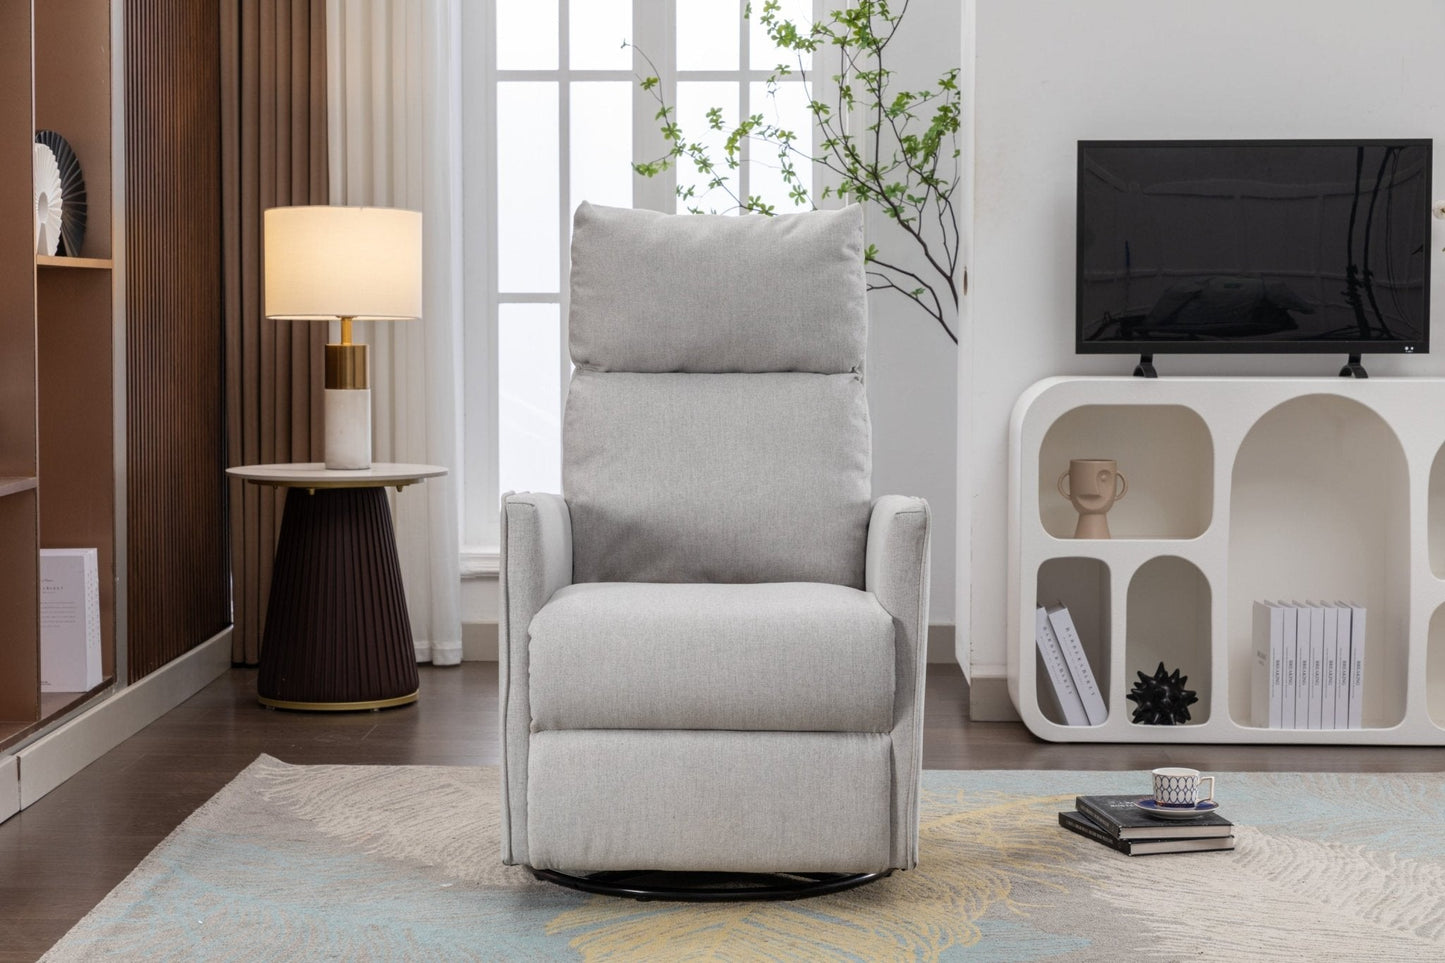 038-Cotton Linen Fabric Swivel Rocking Chair Glider Rocker Recliner Nursery Chair With Adjustable Back And Footrest For Living Room Indoor,Light Gray